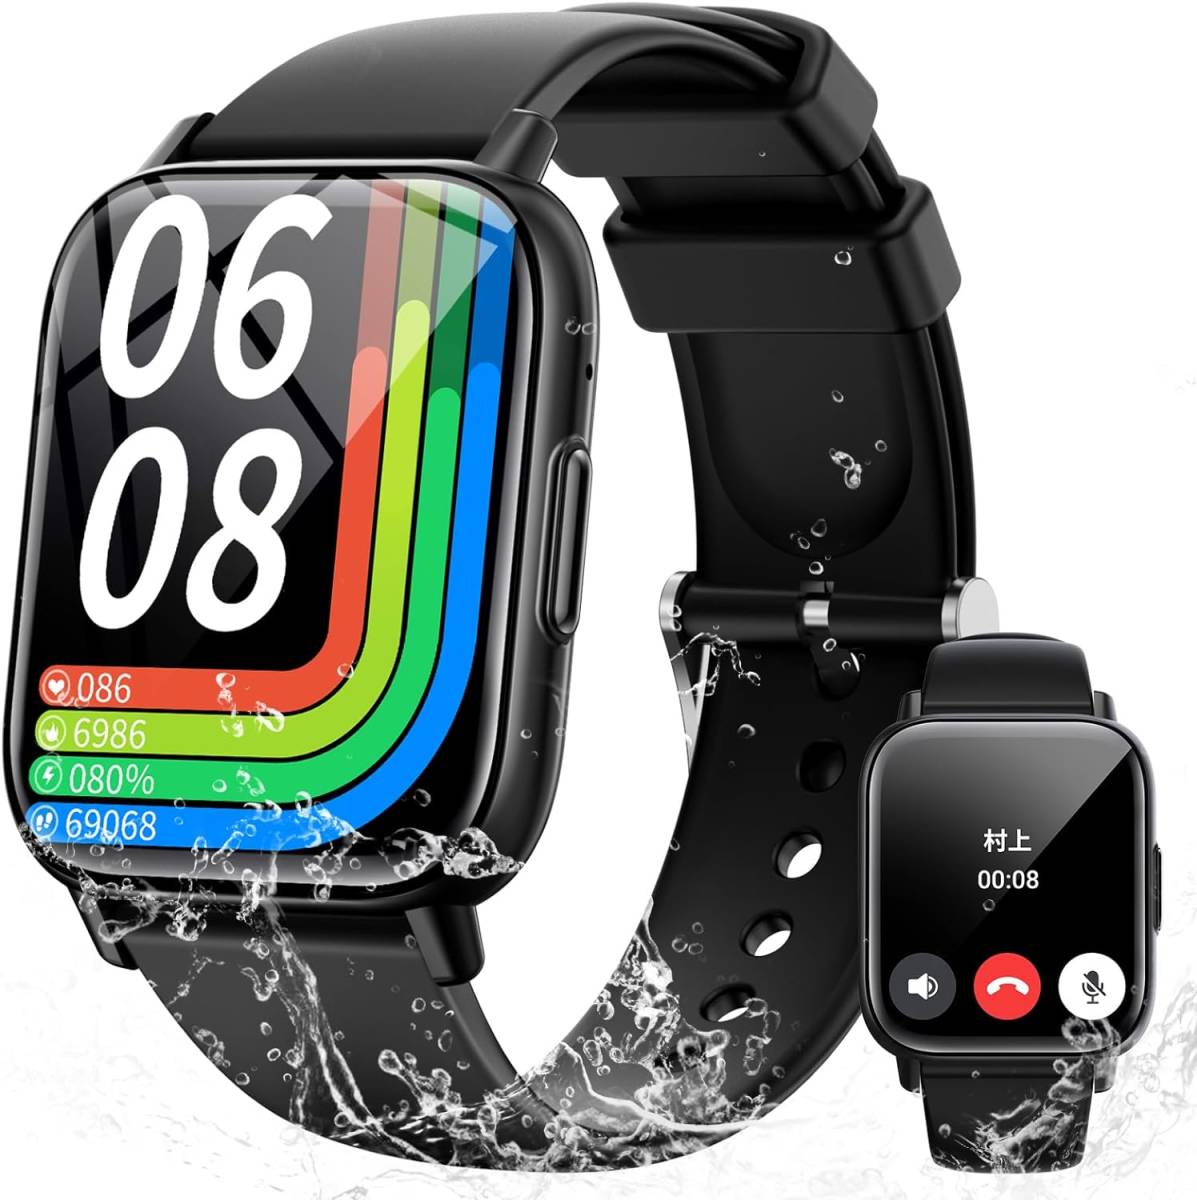  large screen smart watch black 1.83 -inch iPhone/Android